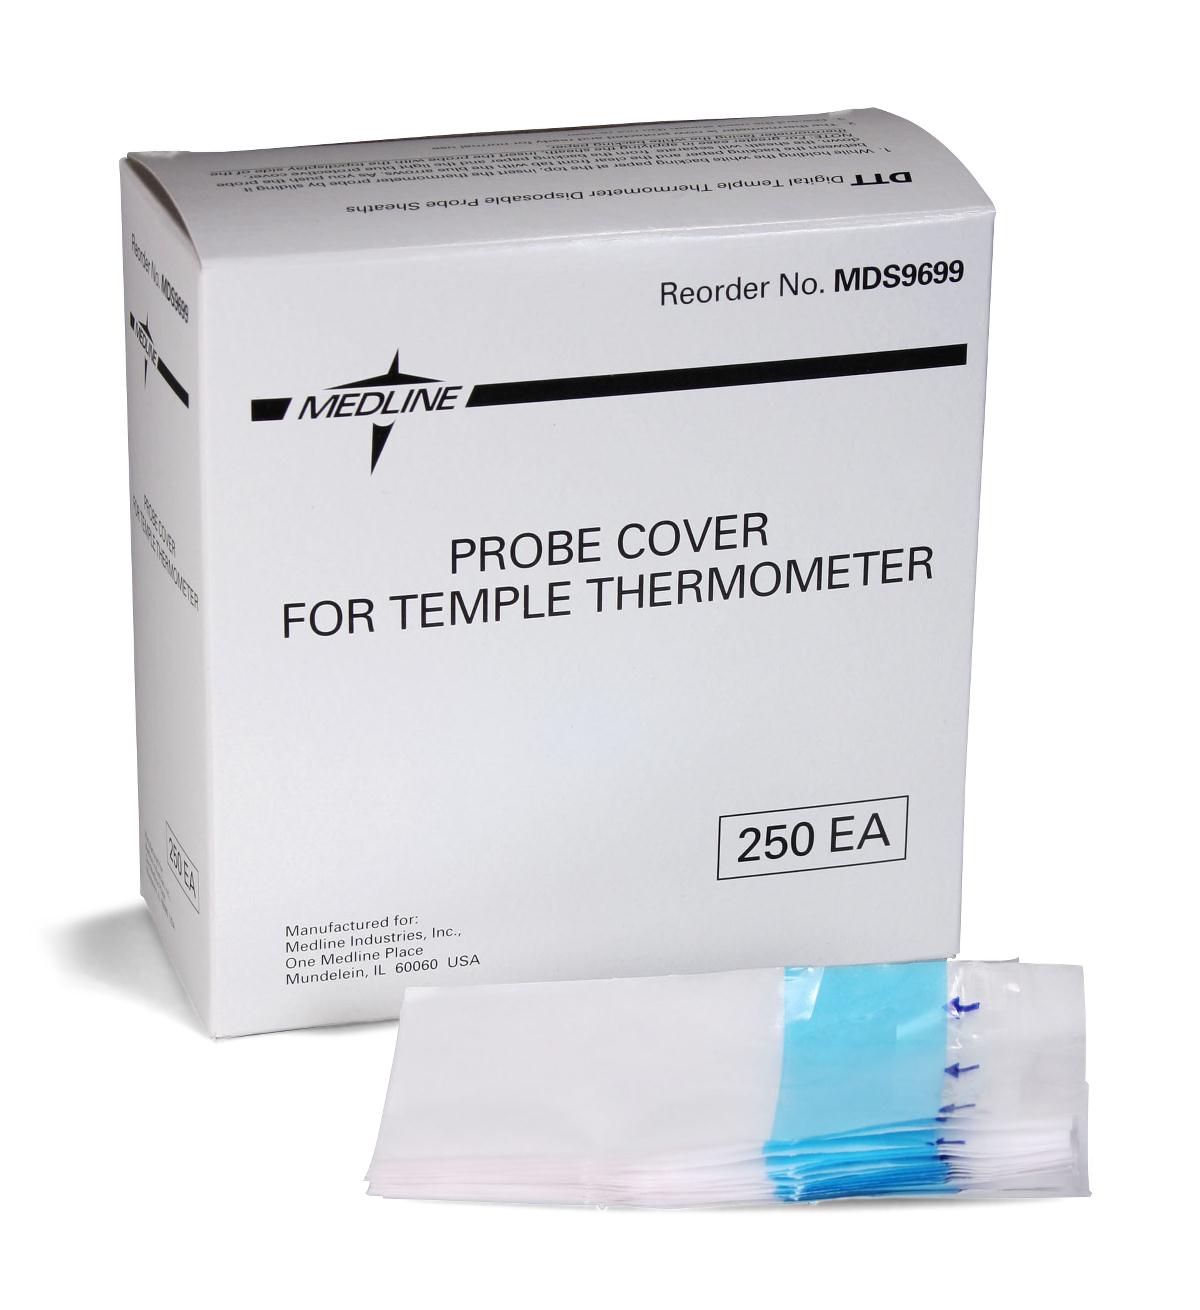 Thermometer Probe Covers For Digital Thermometer